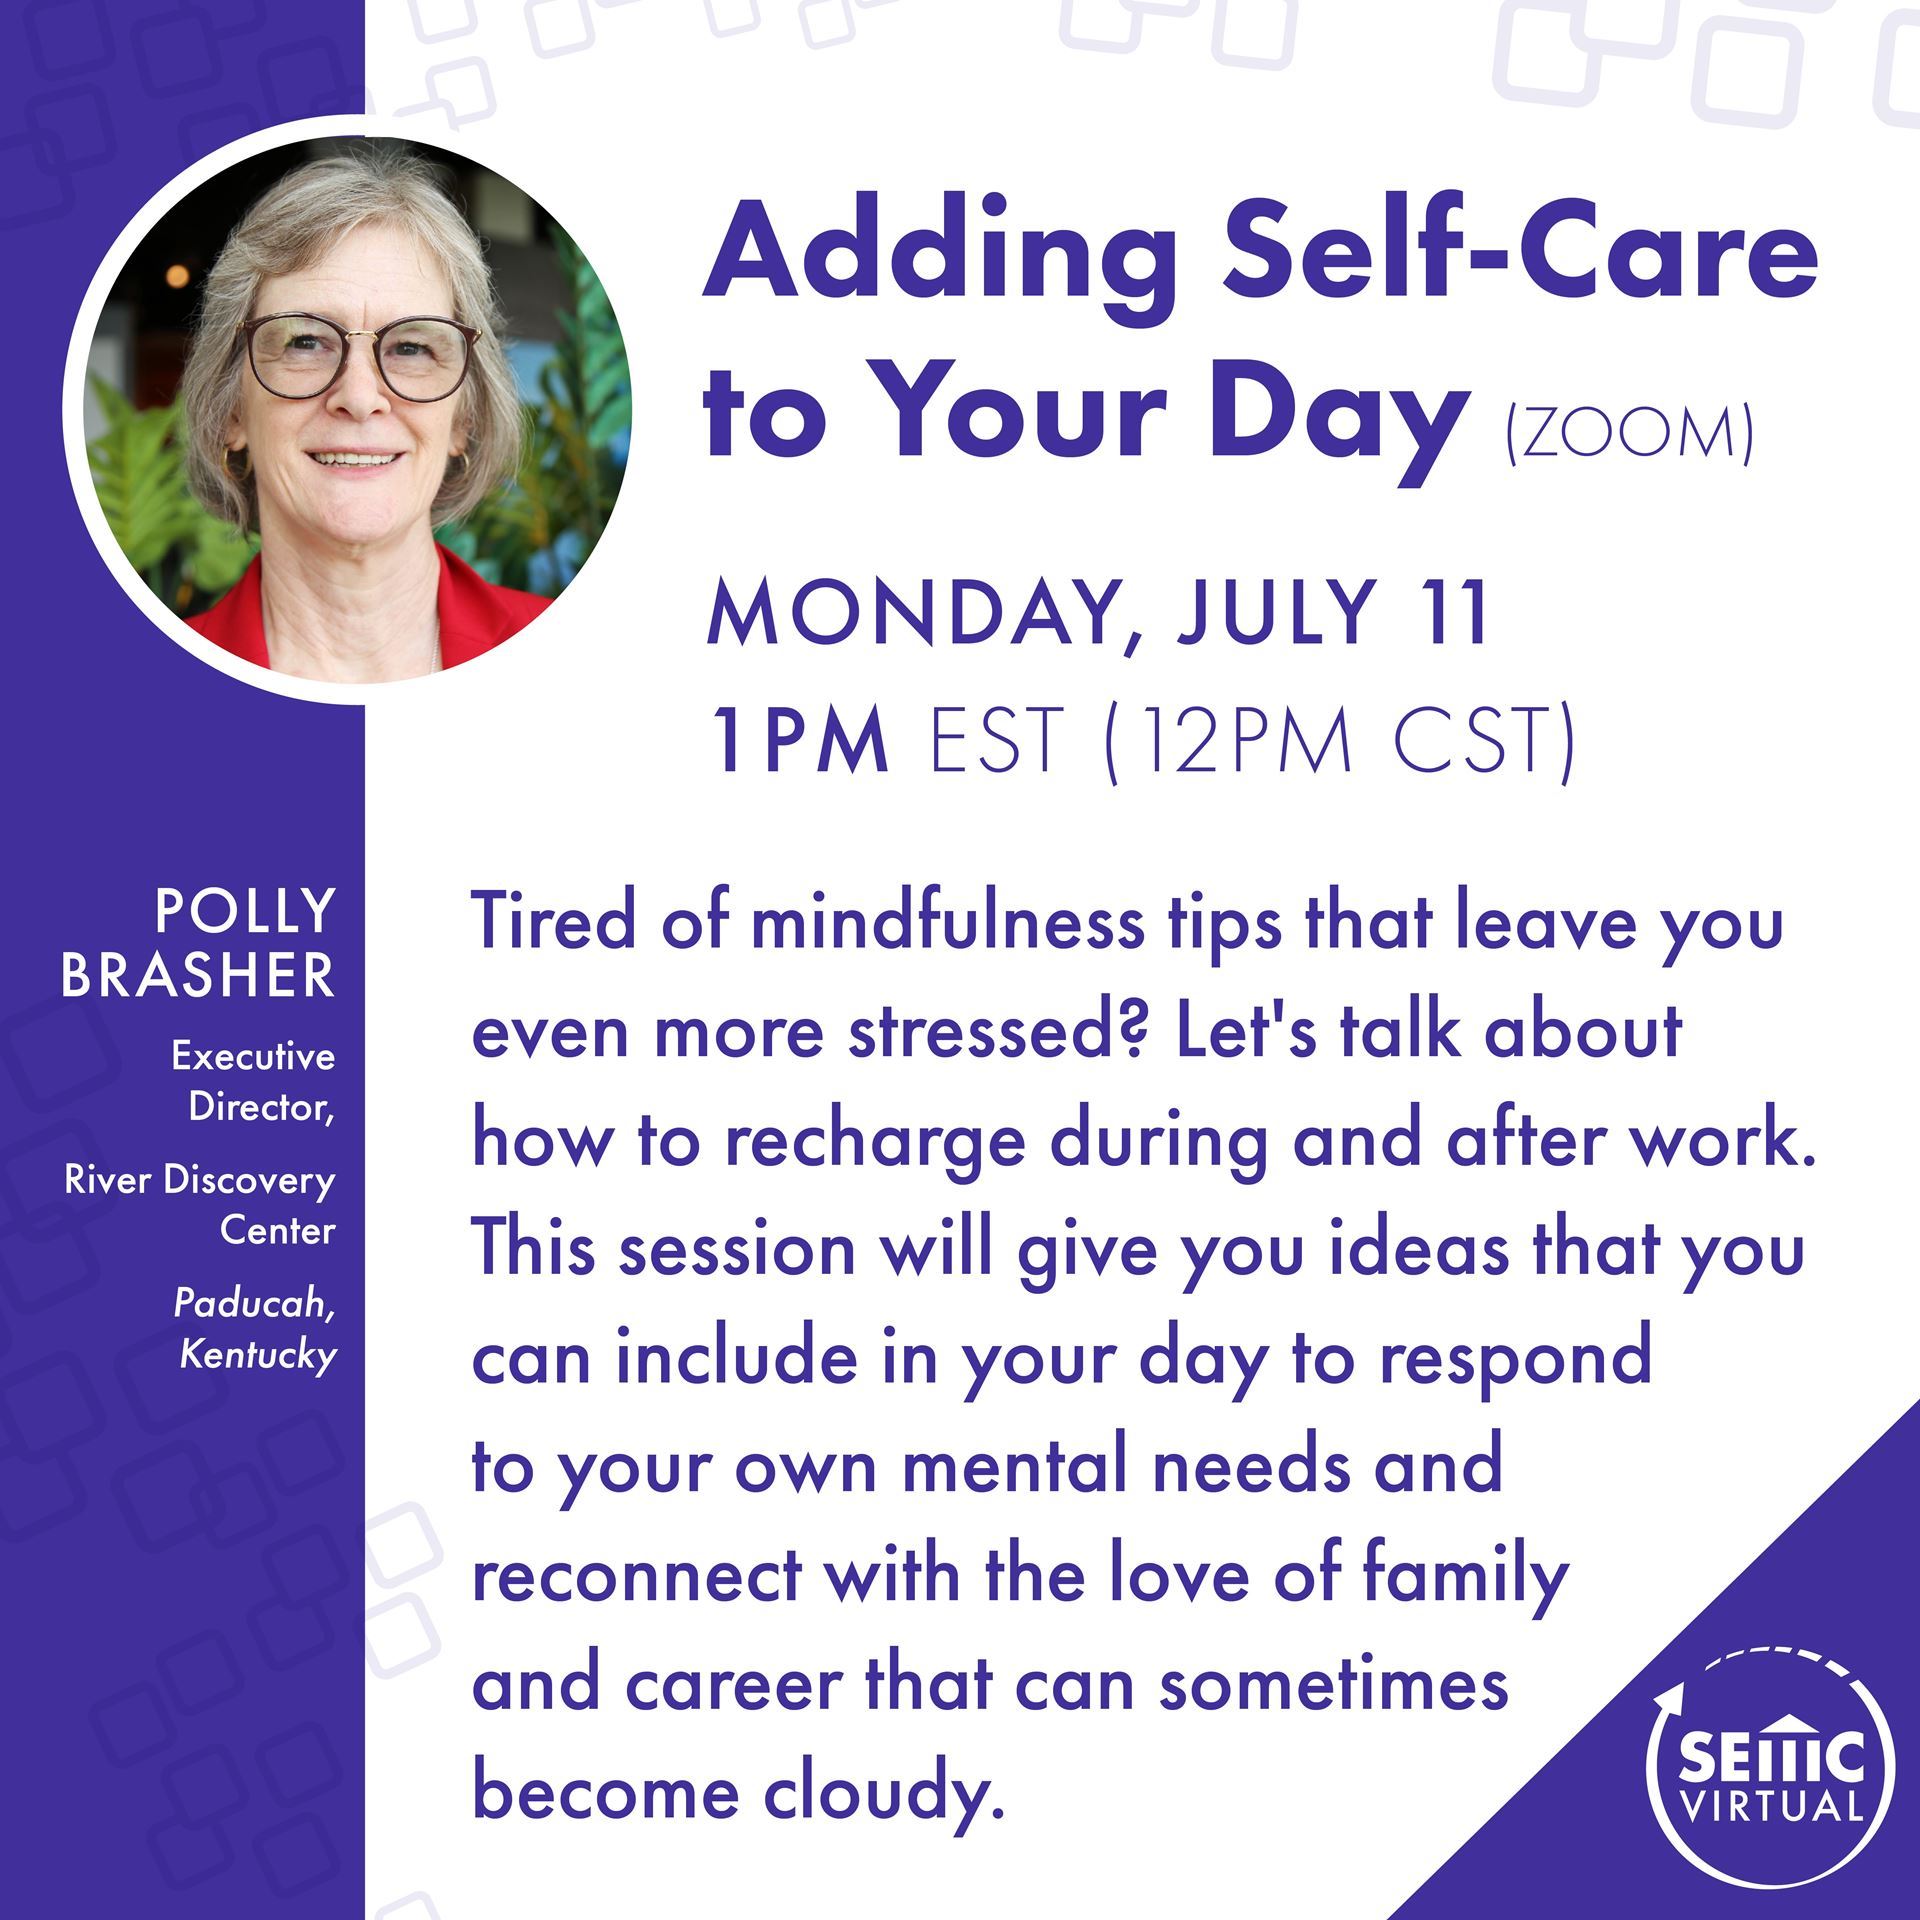 "Adding self-care to your day" Zoom call poster for Monday, July 11 at 1 pm Eastern Standard Time  is bolded in purple. 